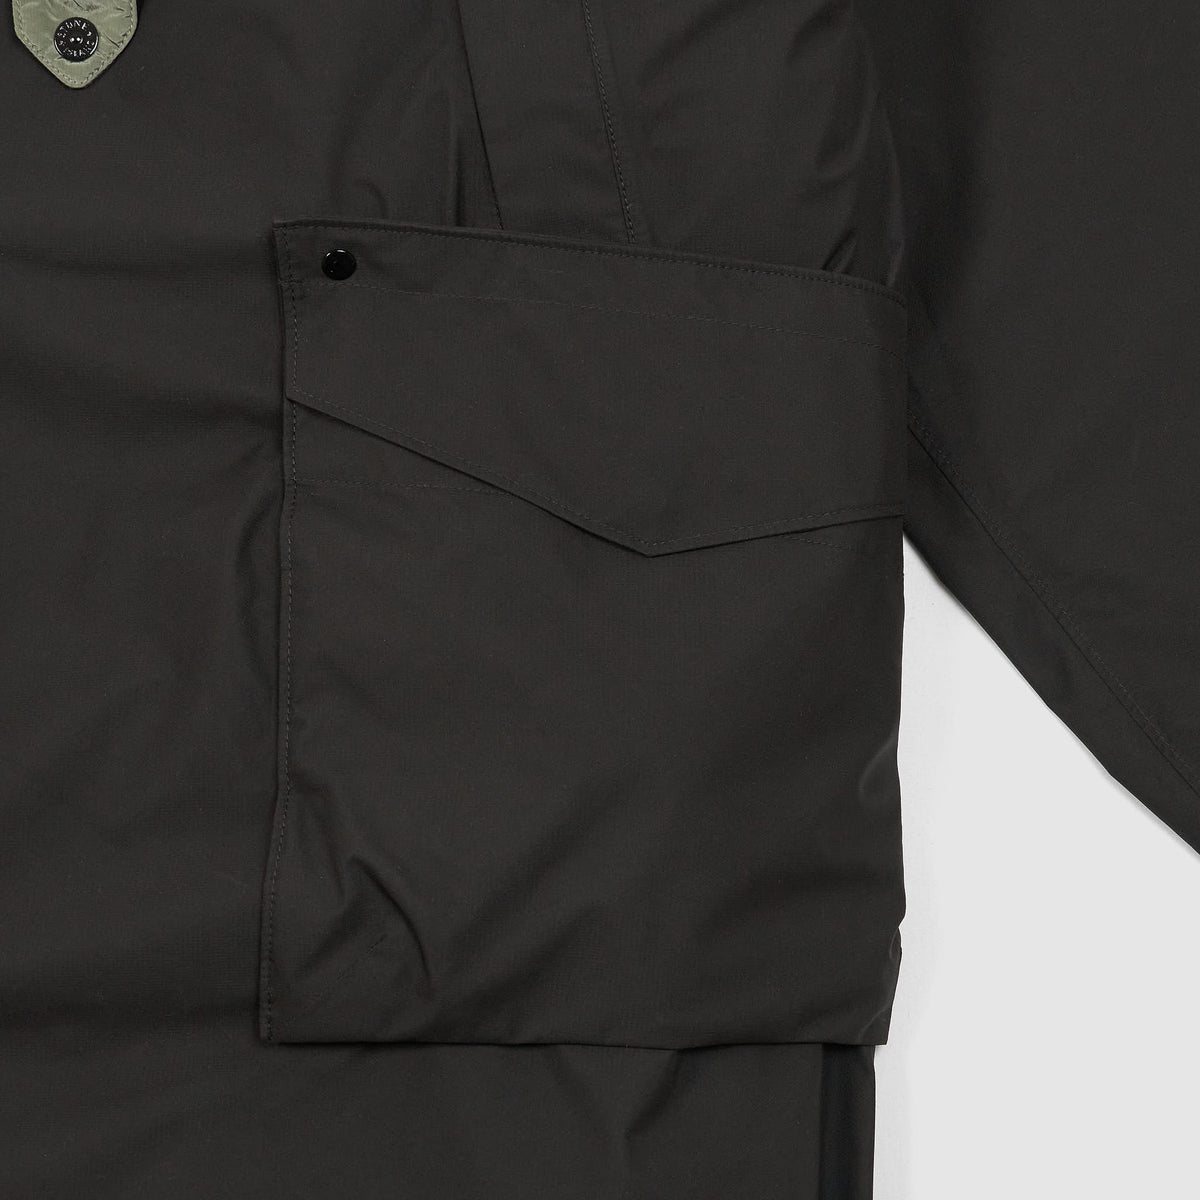 Stone Island Multifunctional Down Vest with Packable Gore-Tex Raincoat